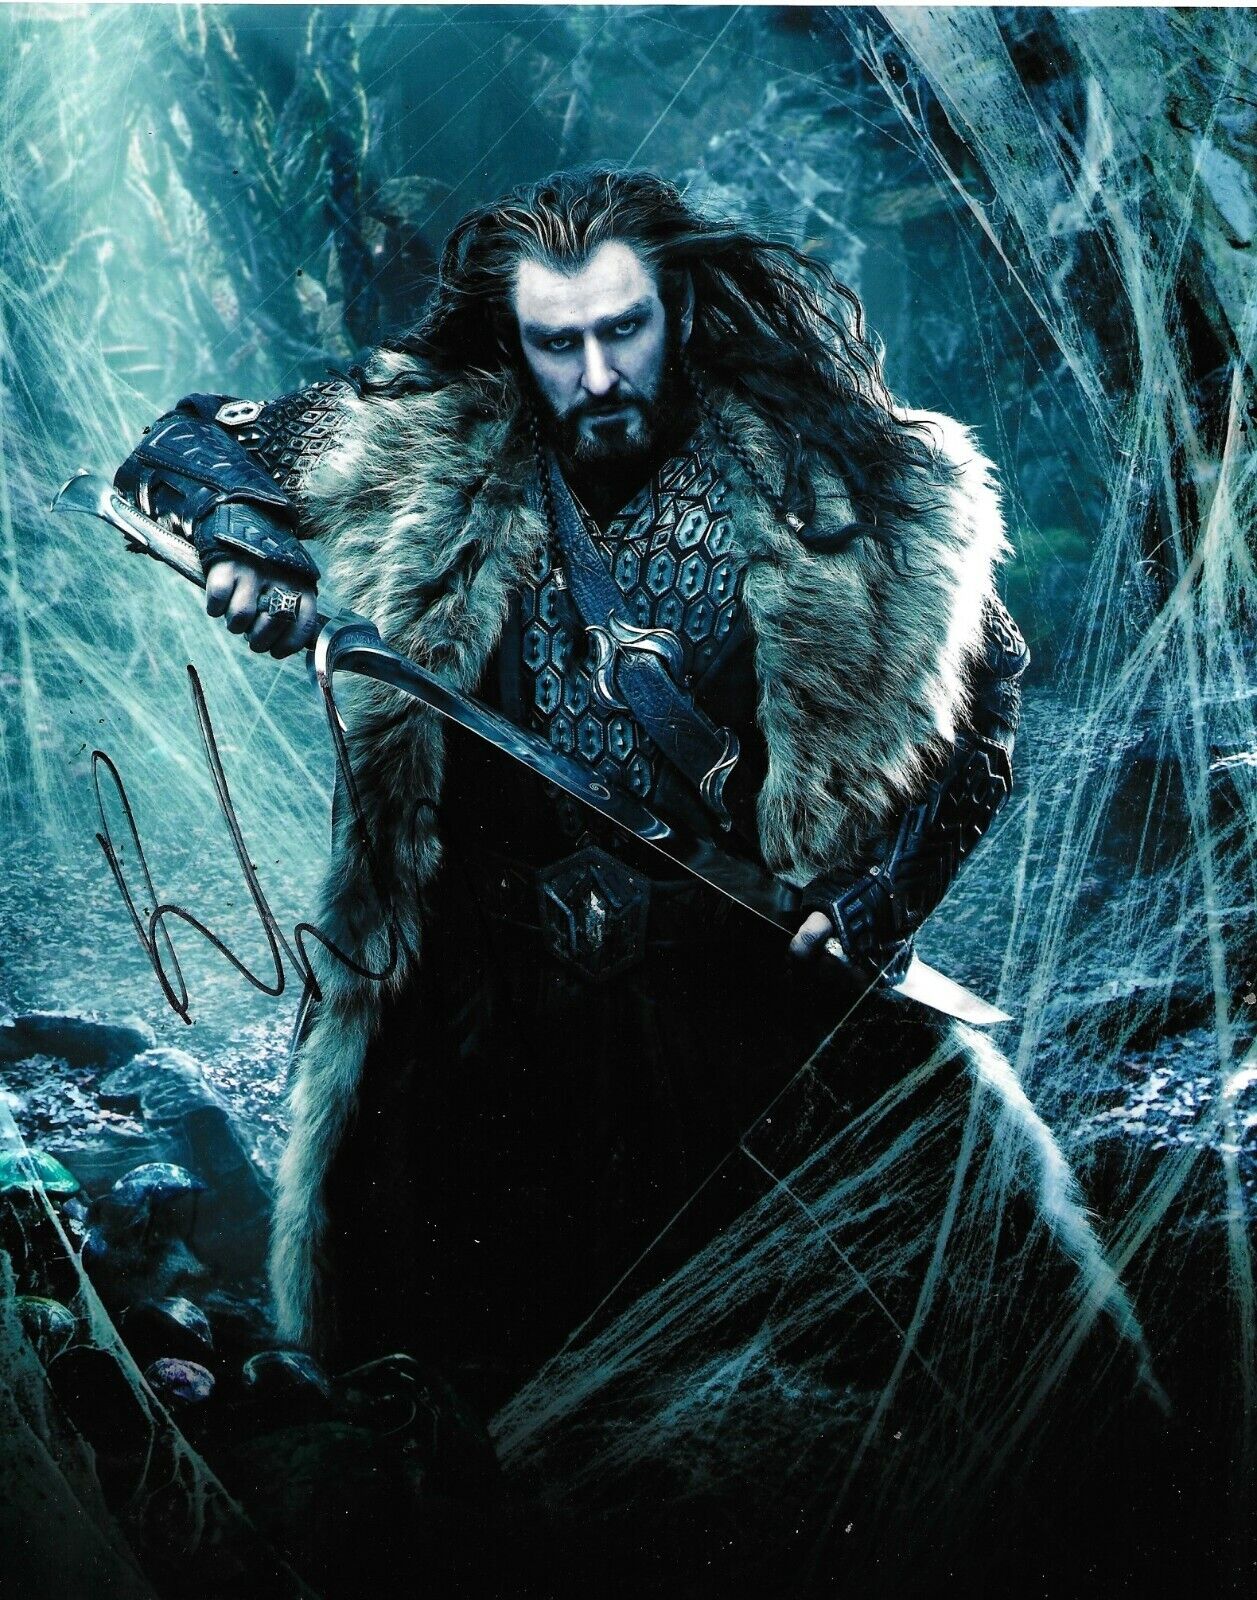 Richard Armitage Signed The Hobbit 10x8 Photo Poster painting AFTAL